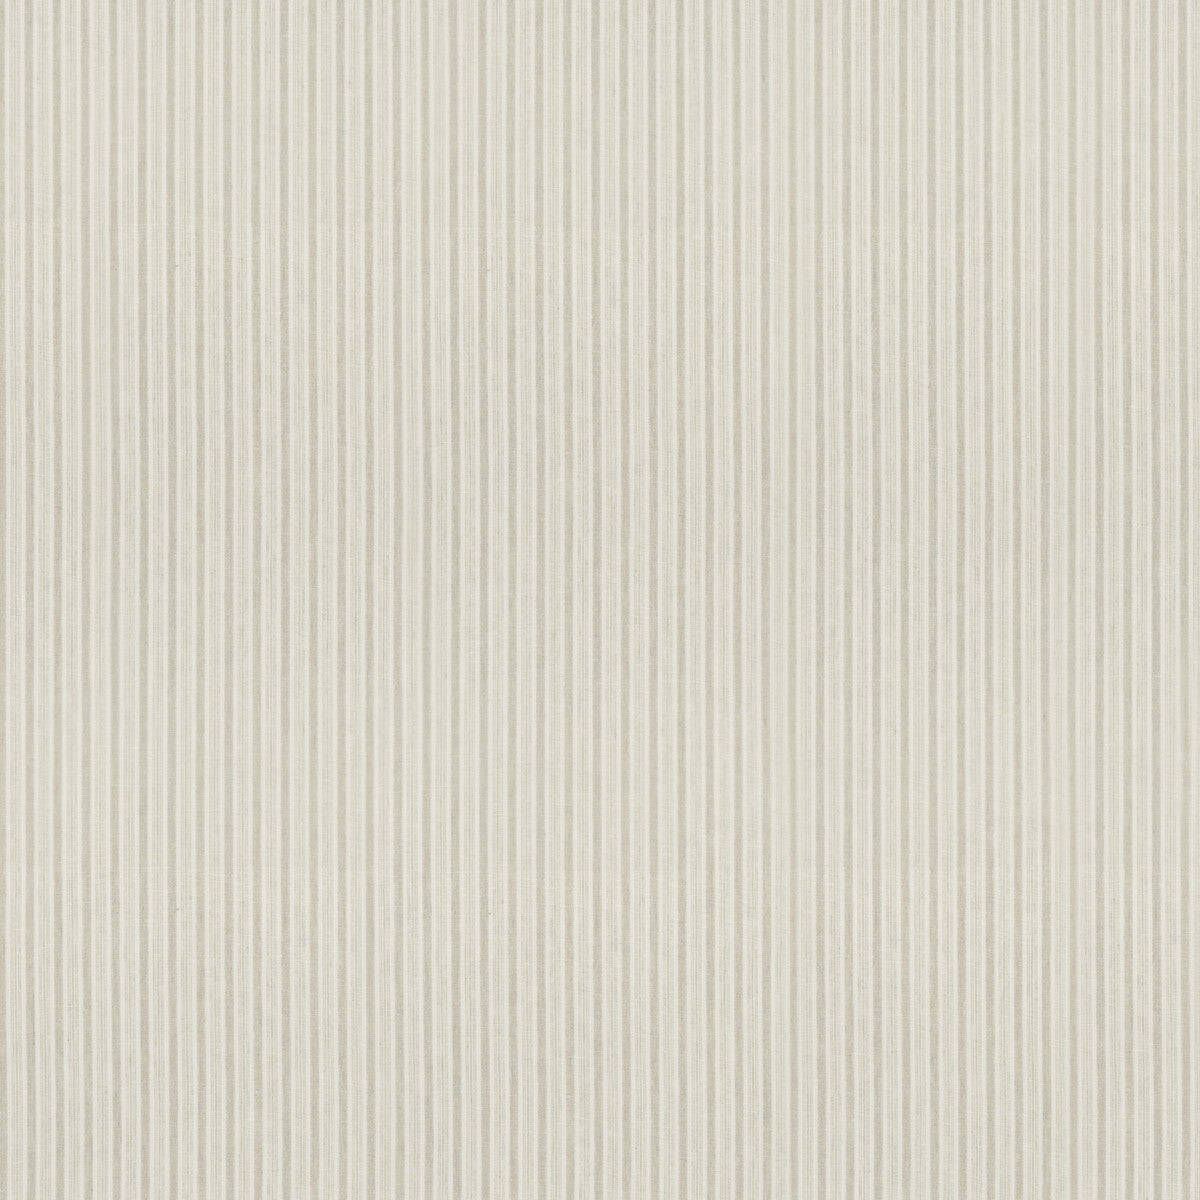 Reef fabric in parchment color - pattern ED85407.225.0 - by Threads in the Quintessential Naturals collection